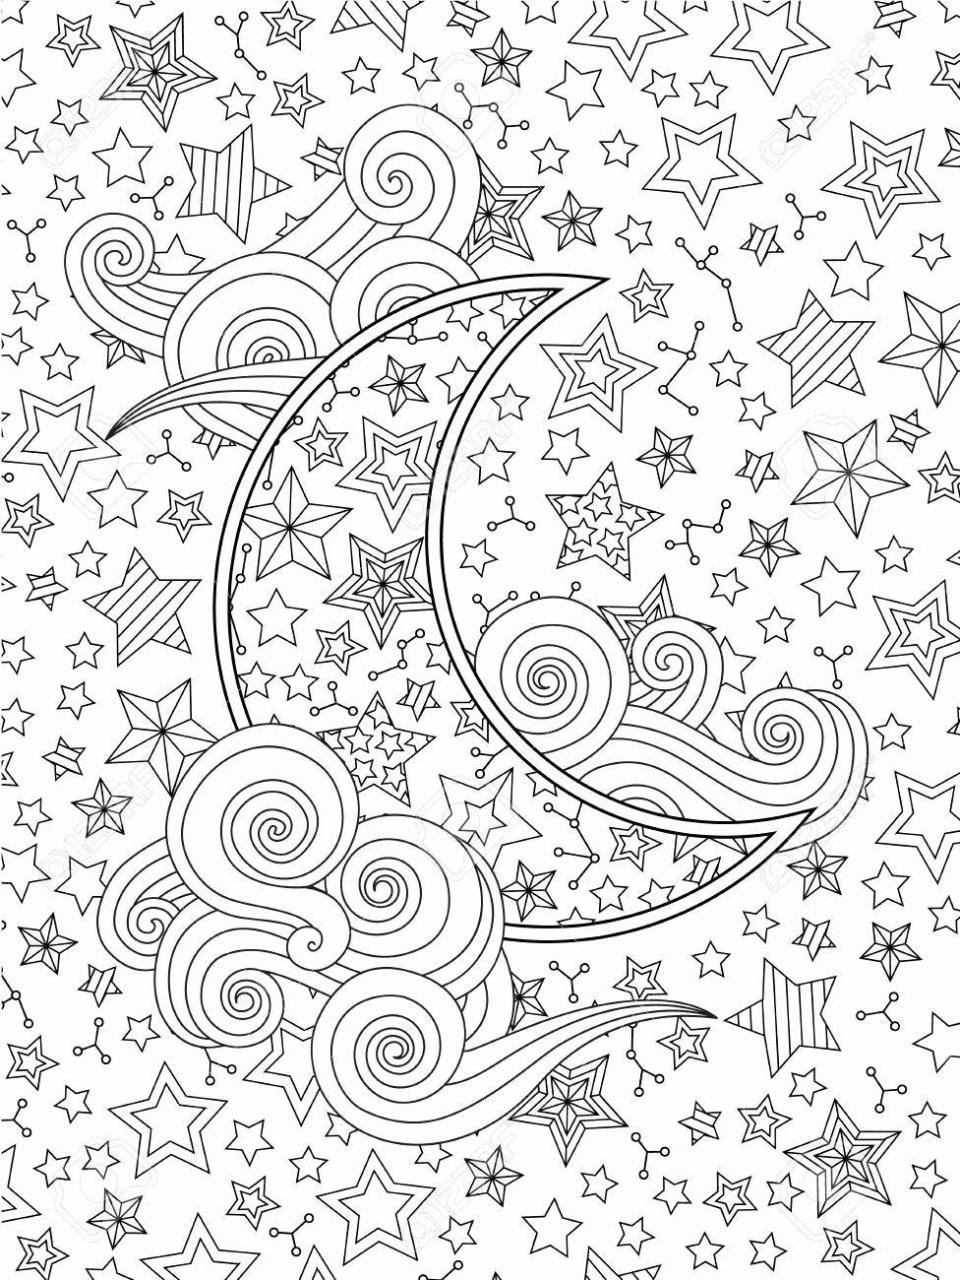 Sky Coloring Pages For Adults